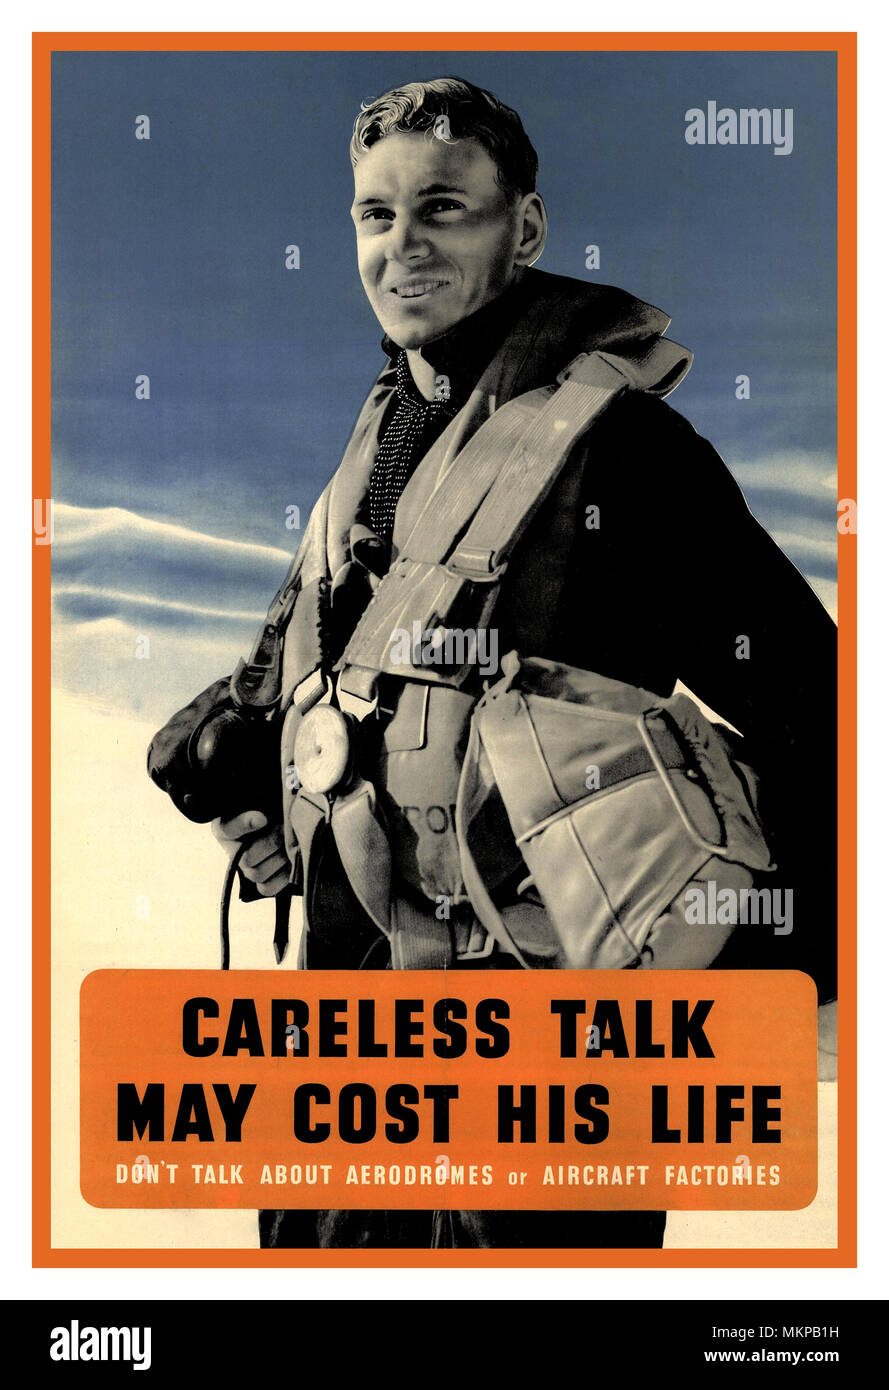 WW2 information Propaganda UK vintage Poster featuring an RAF fighter pilot 1939-45 “Careless Talk May Cost His Life”. ‘Don’t Talk About Aerodromes or Aircraft Factories’ Stock Photo